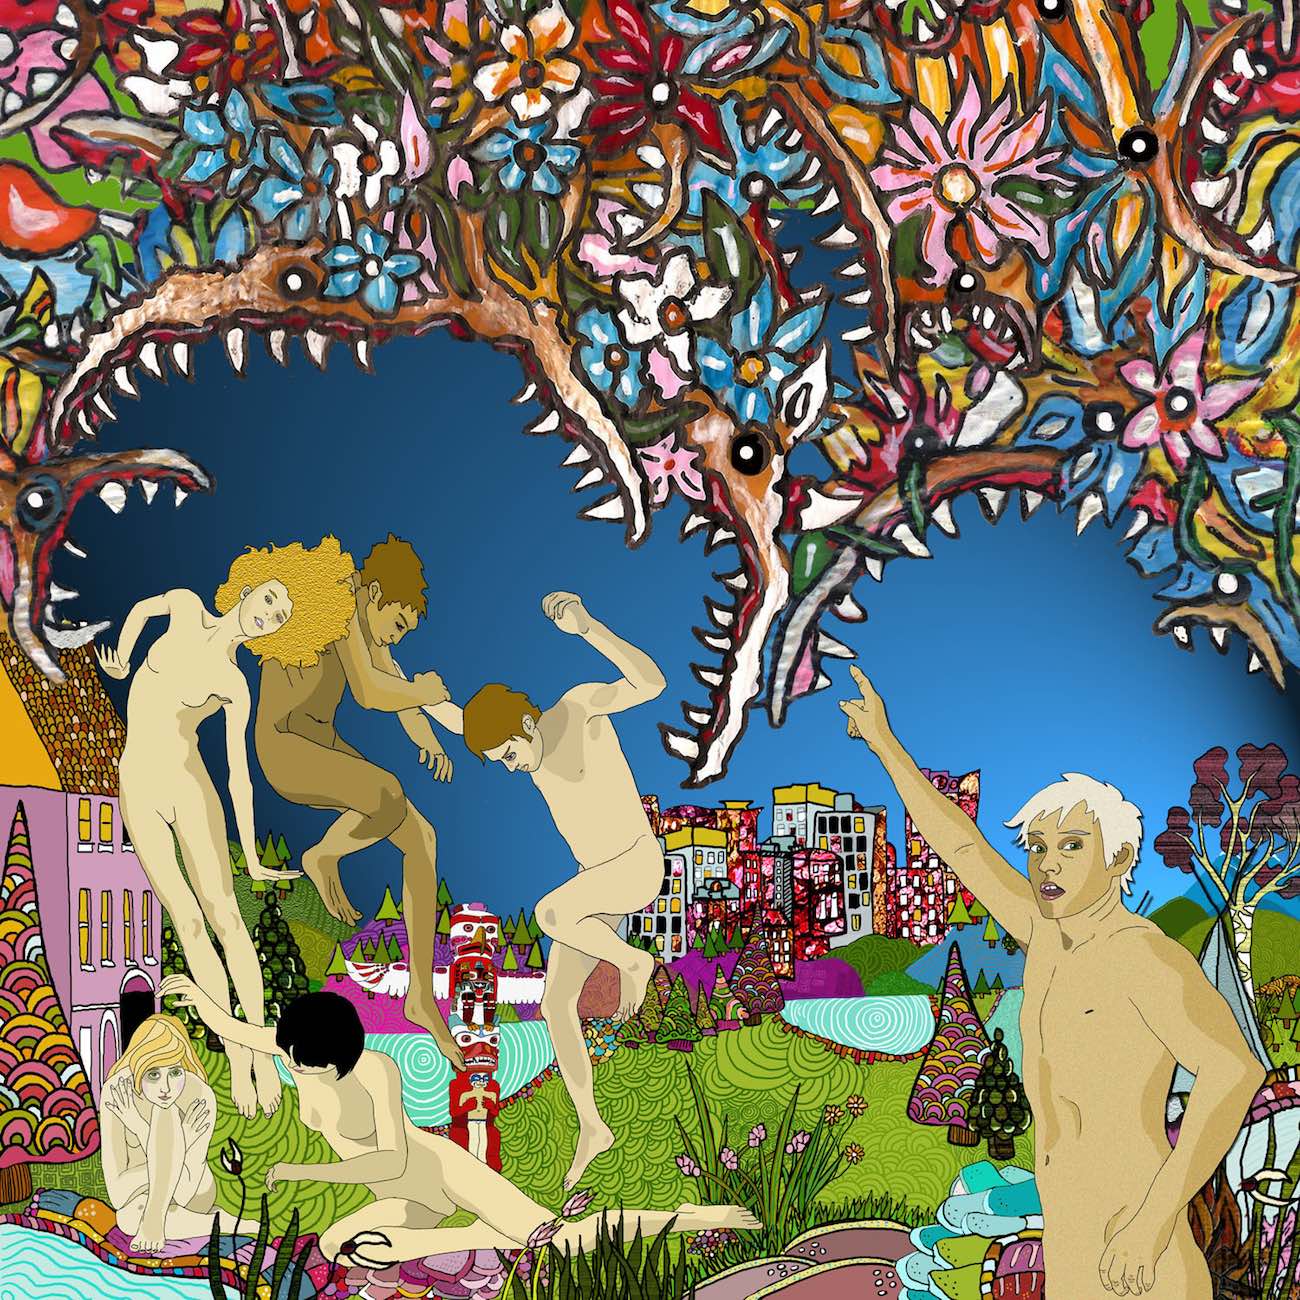 Graphics of vaguely nude men and women in a garden by a city